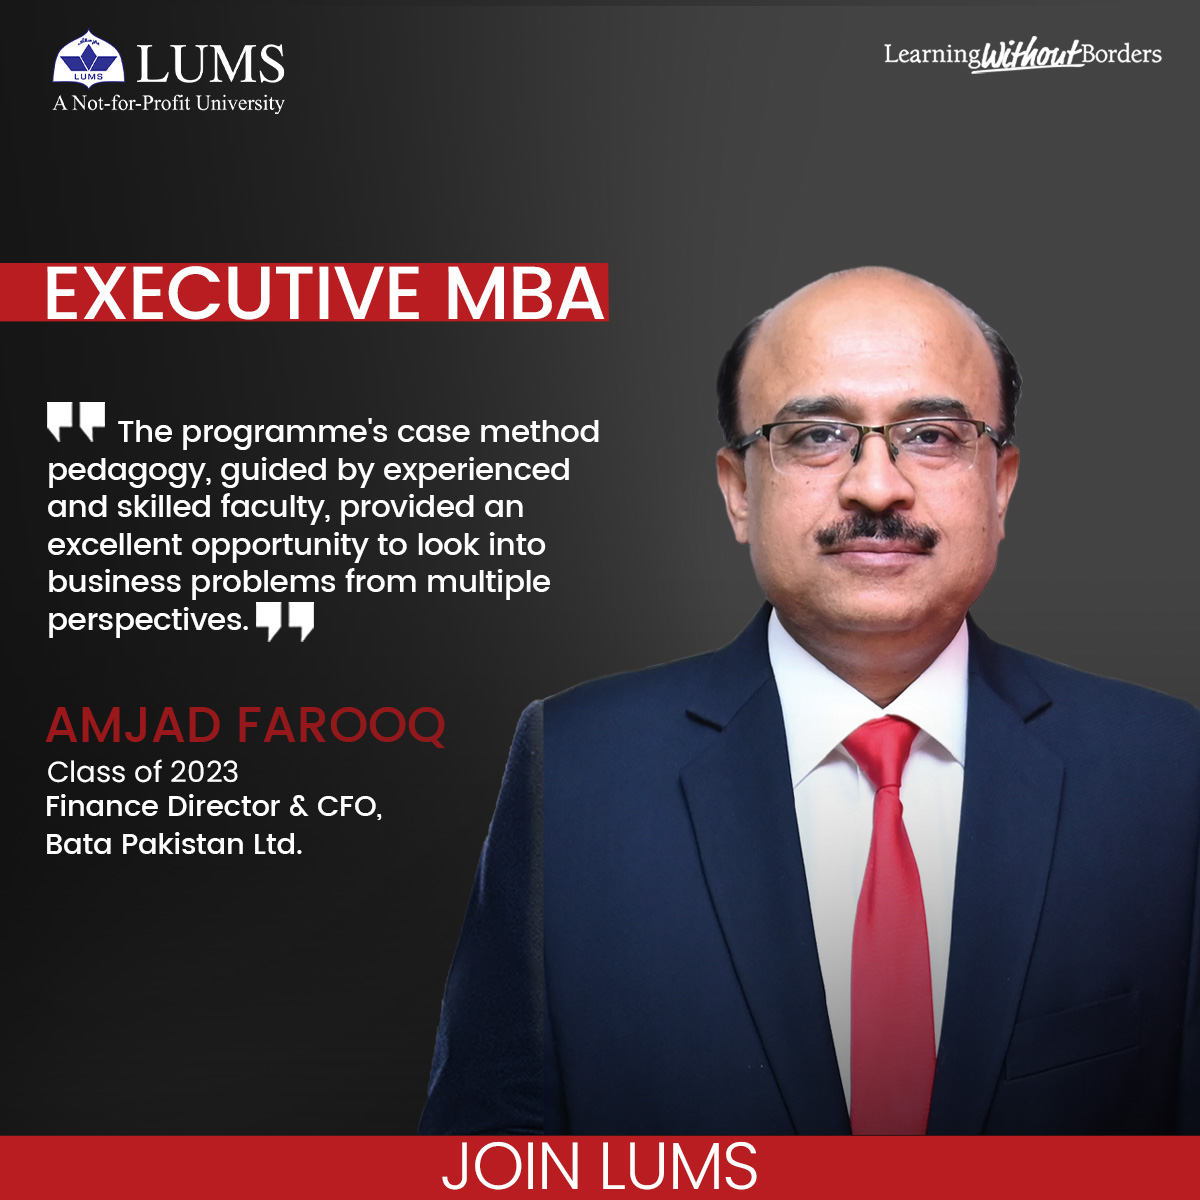 The Executive MBA programme at @SDSB_LUMS transcends traditional learning approaches, enhancing participants’ strategic thinking abilities through case method teaching and industry visits. Apply now! bit.ly/49s1jie #LearningWithoutBorders